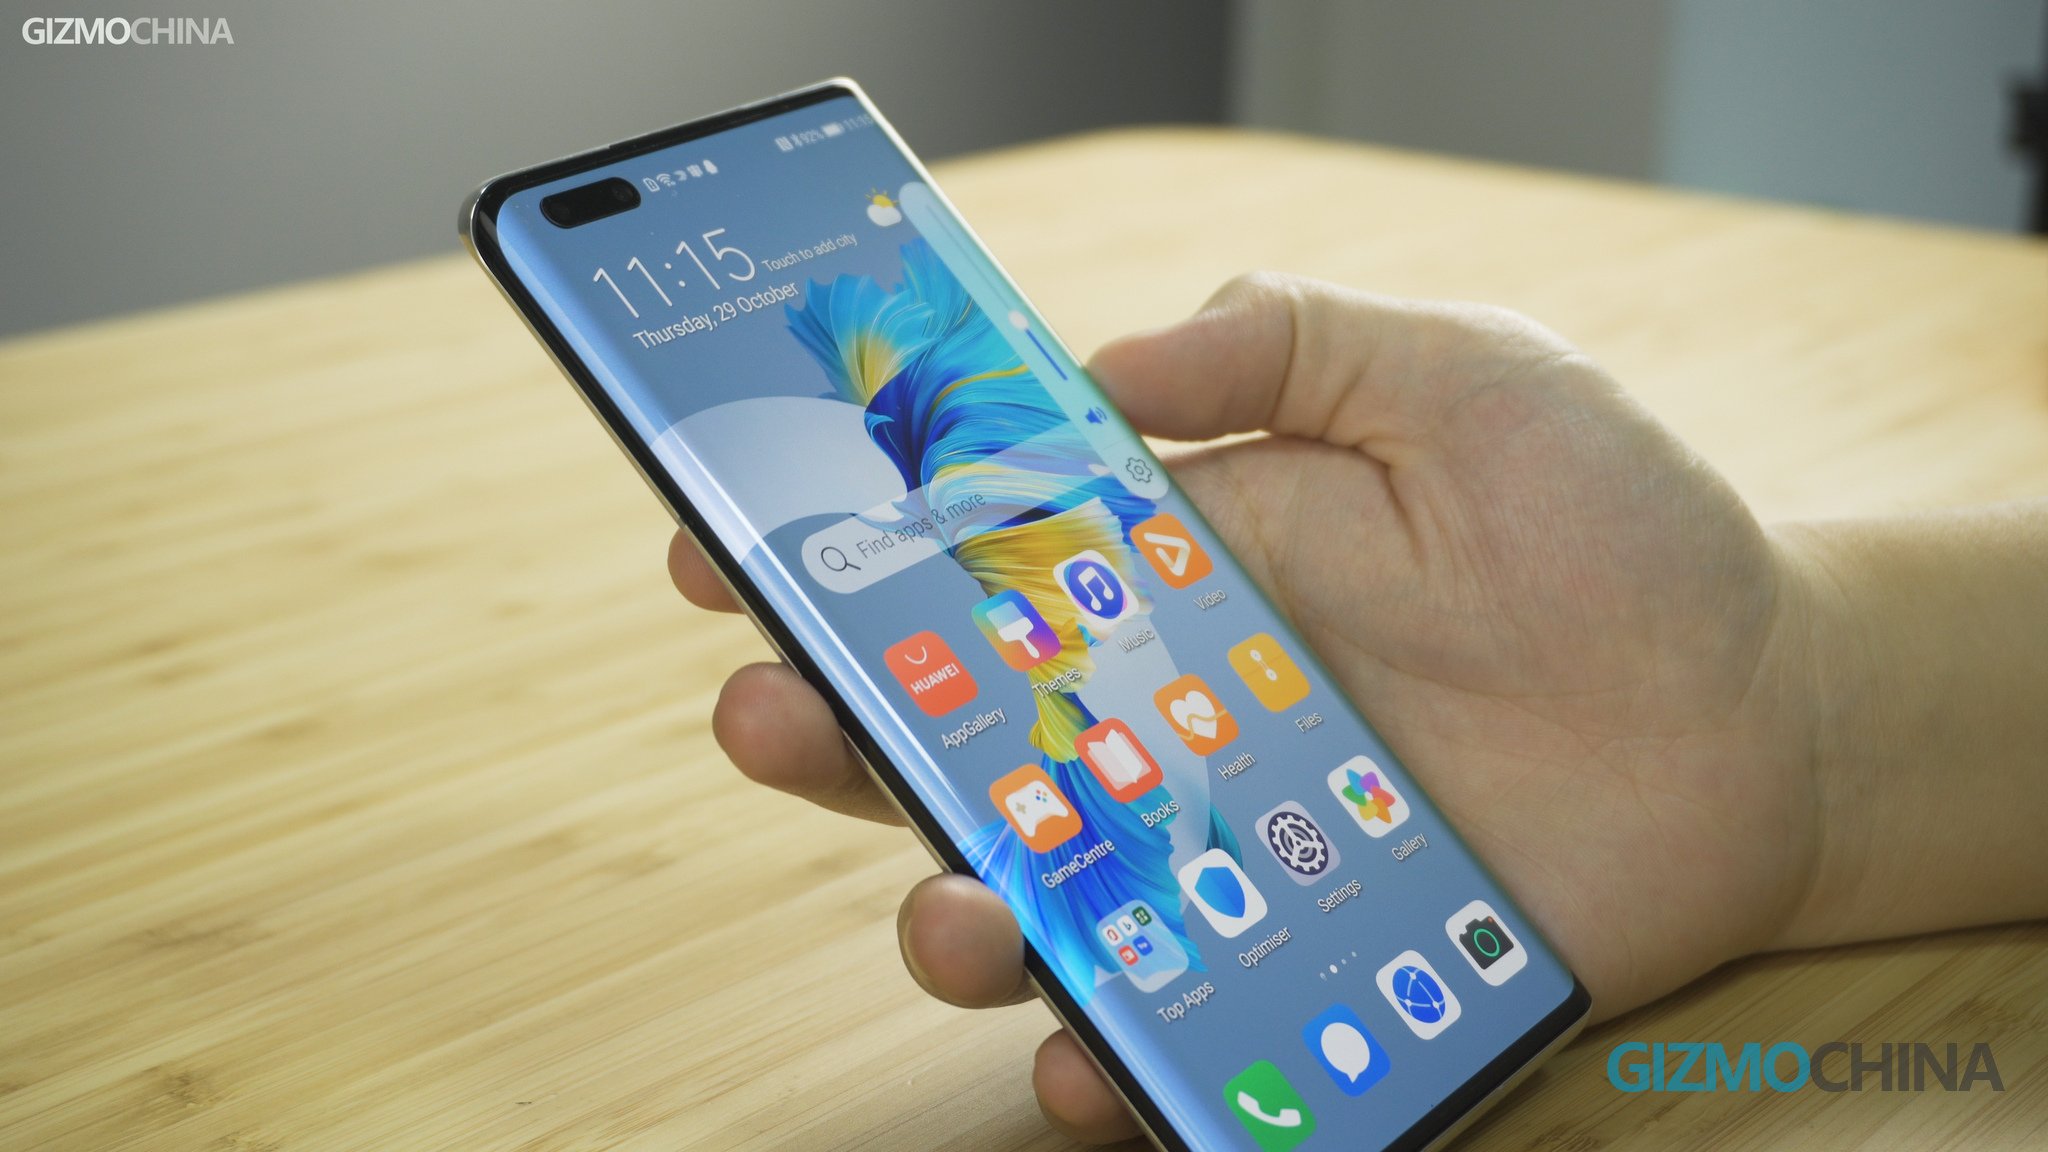 Huawei Mate 40 Pro flagship smartphone faces serious supply chain issues